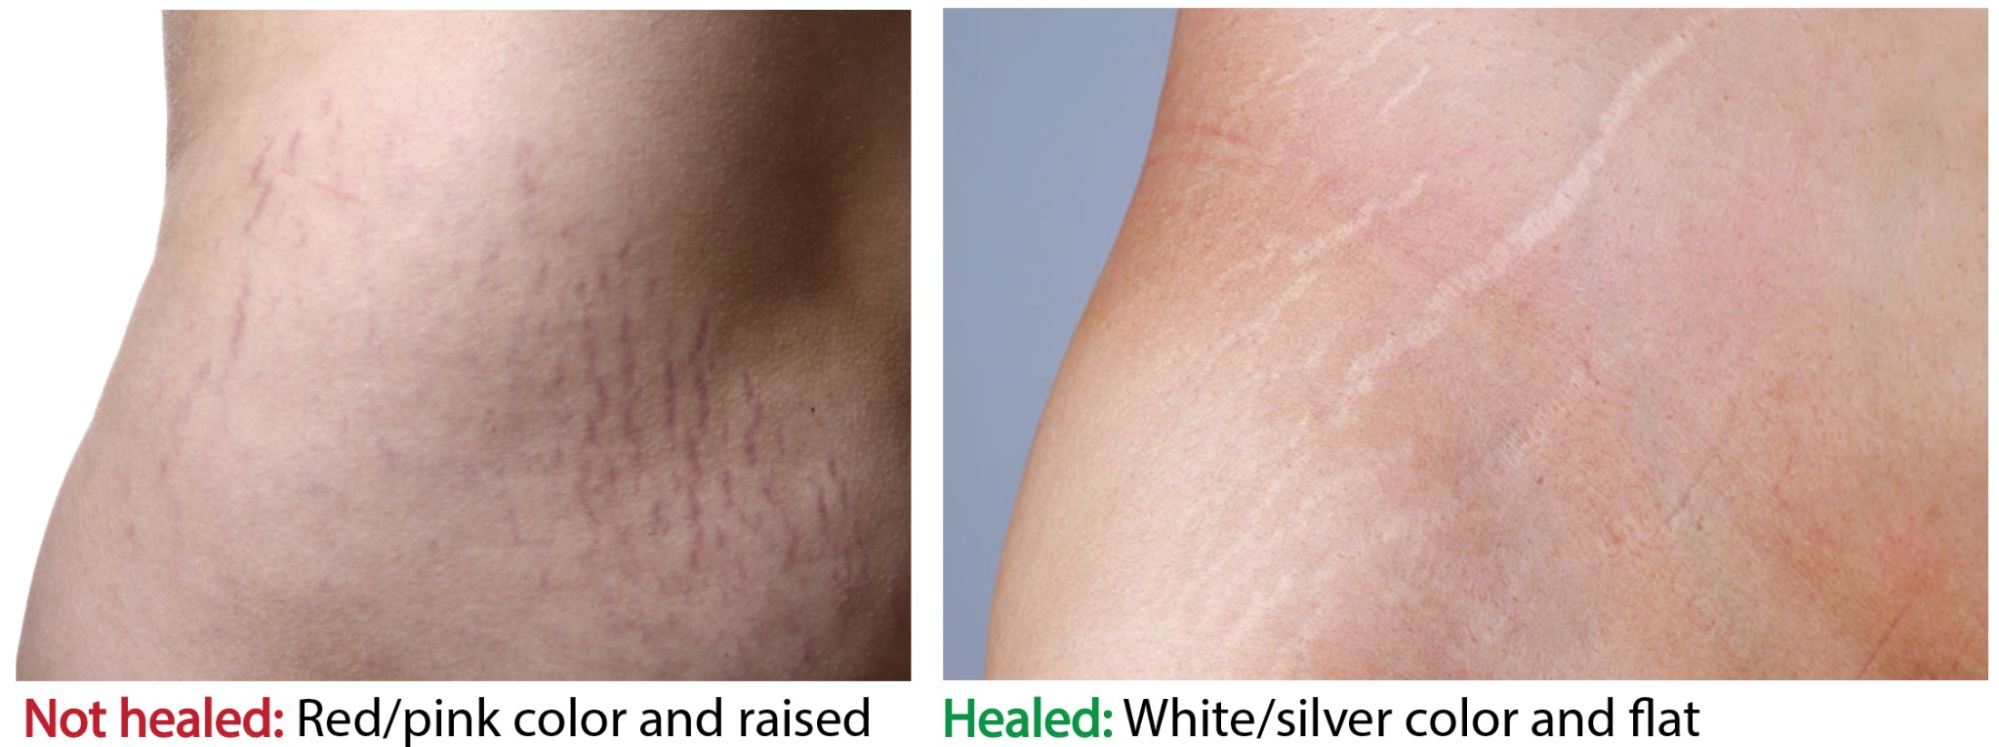 The difference between fresh and healed stretch marks